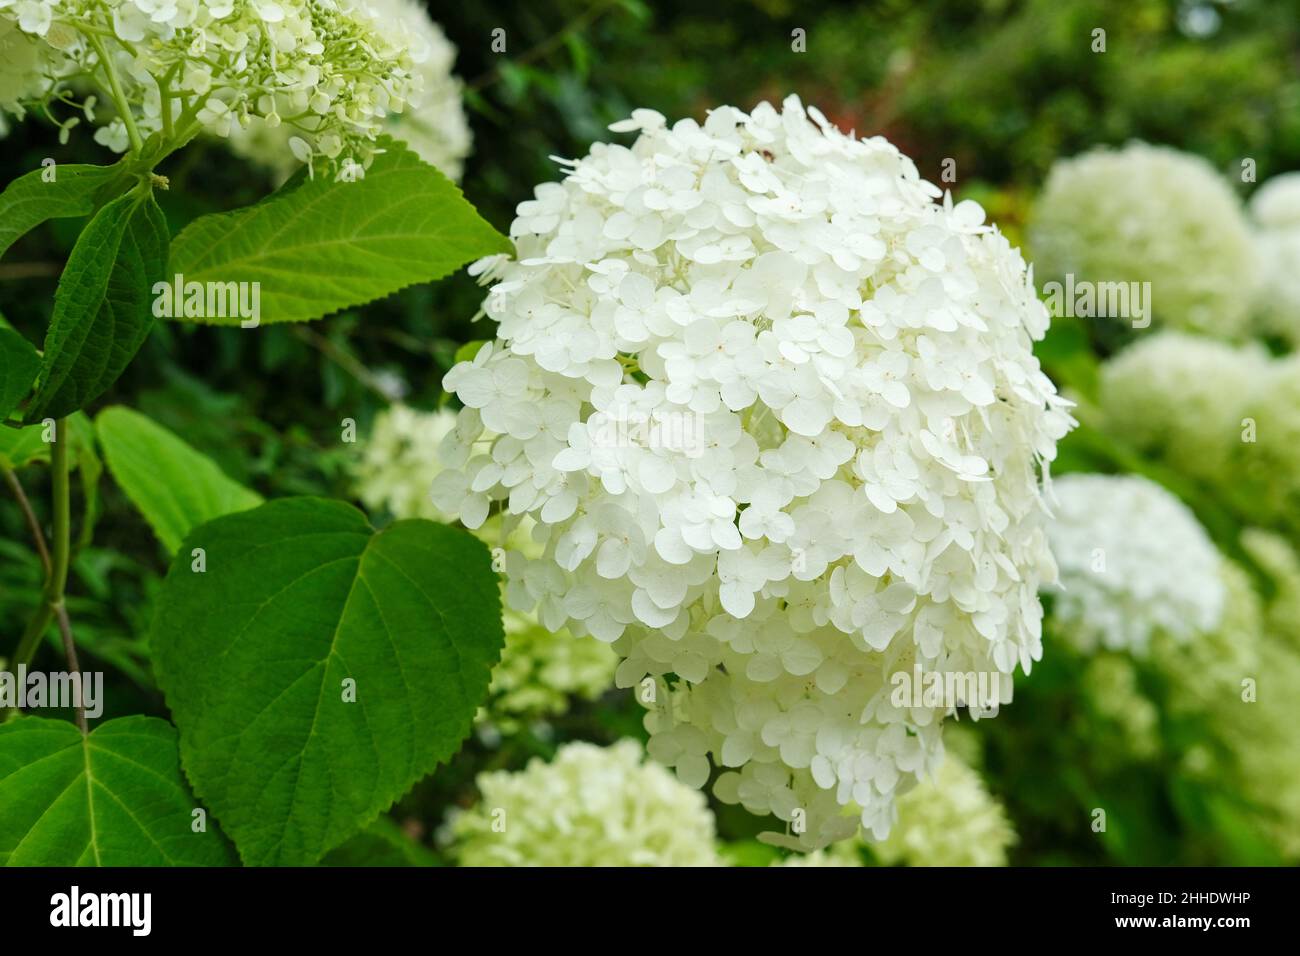 Hydrangea arborescens 'Strong Annabelle'. Hydrangea 'Abetwo', hydrangea 'Strong Annabelle'. Cluster of white flowers Stock Photo